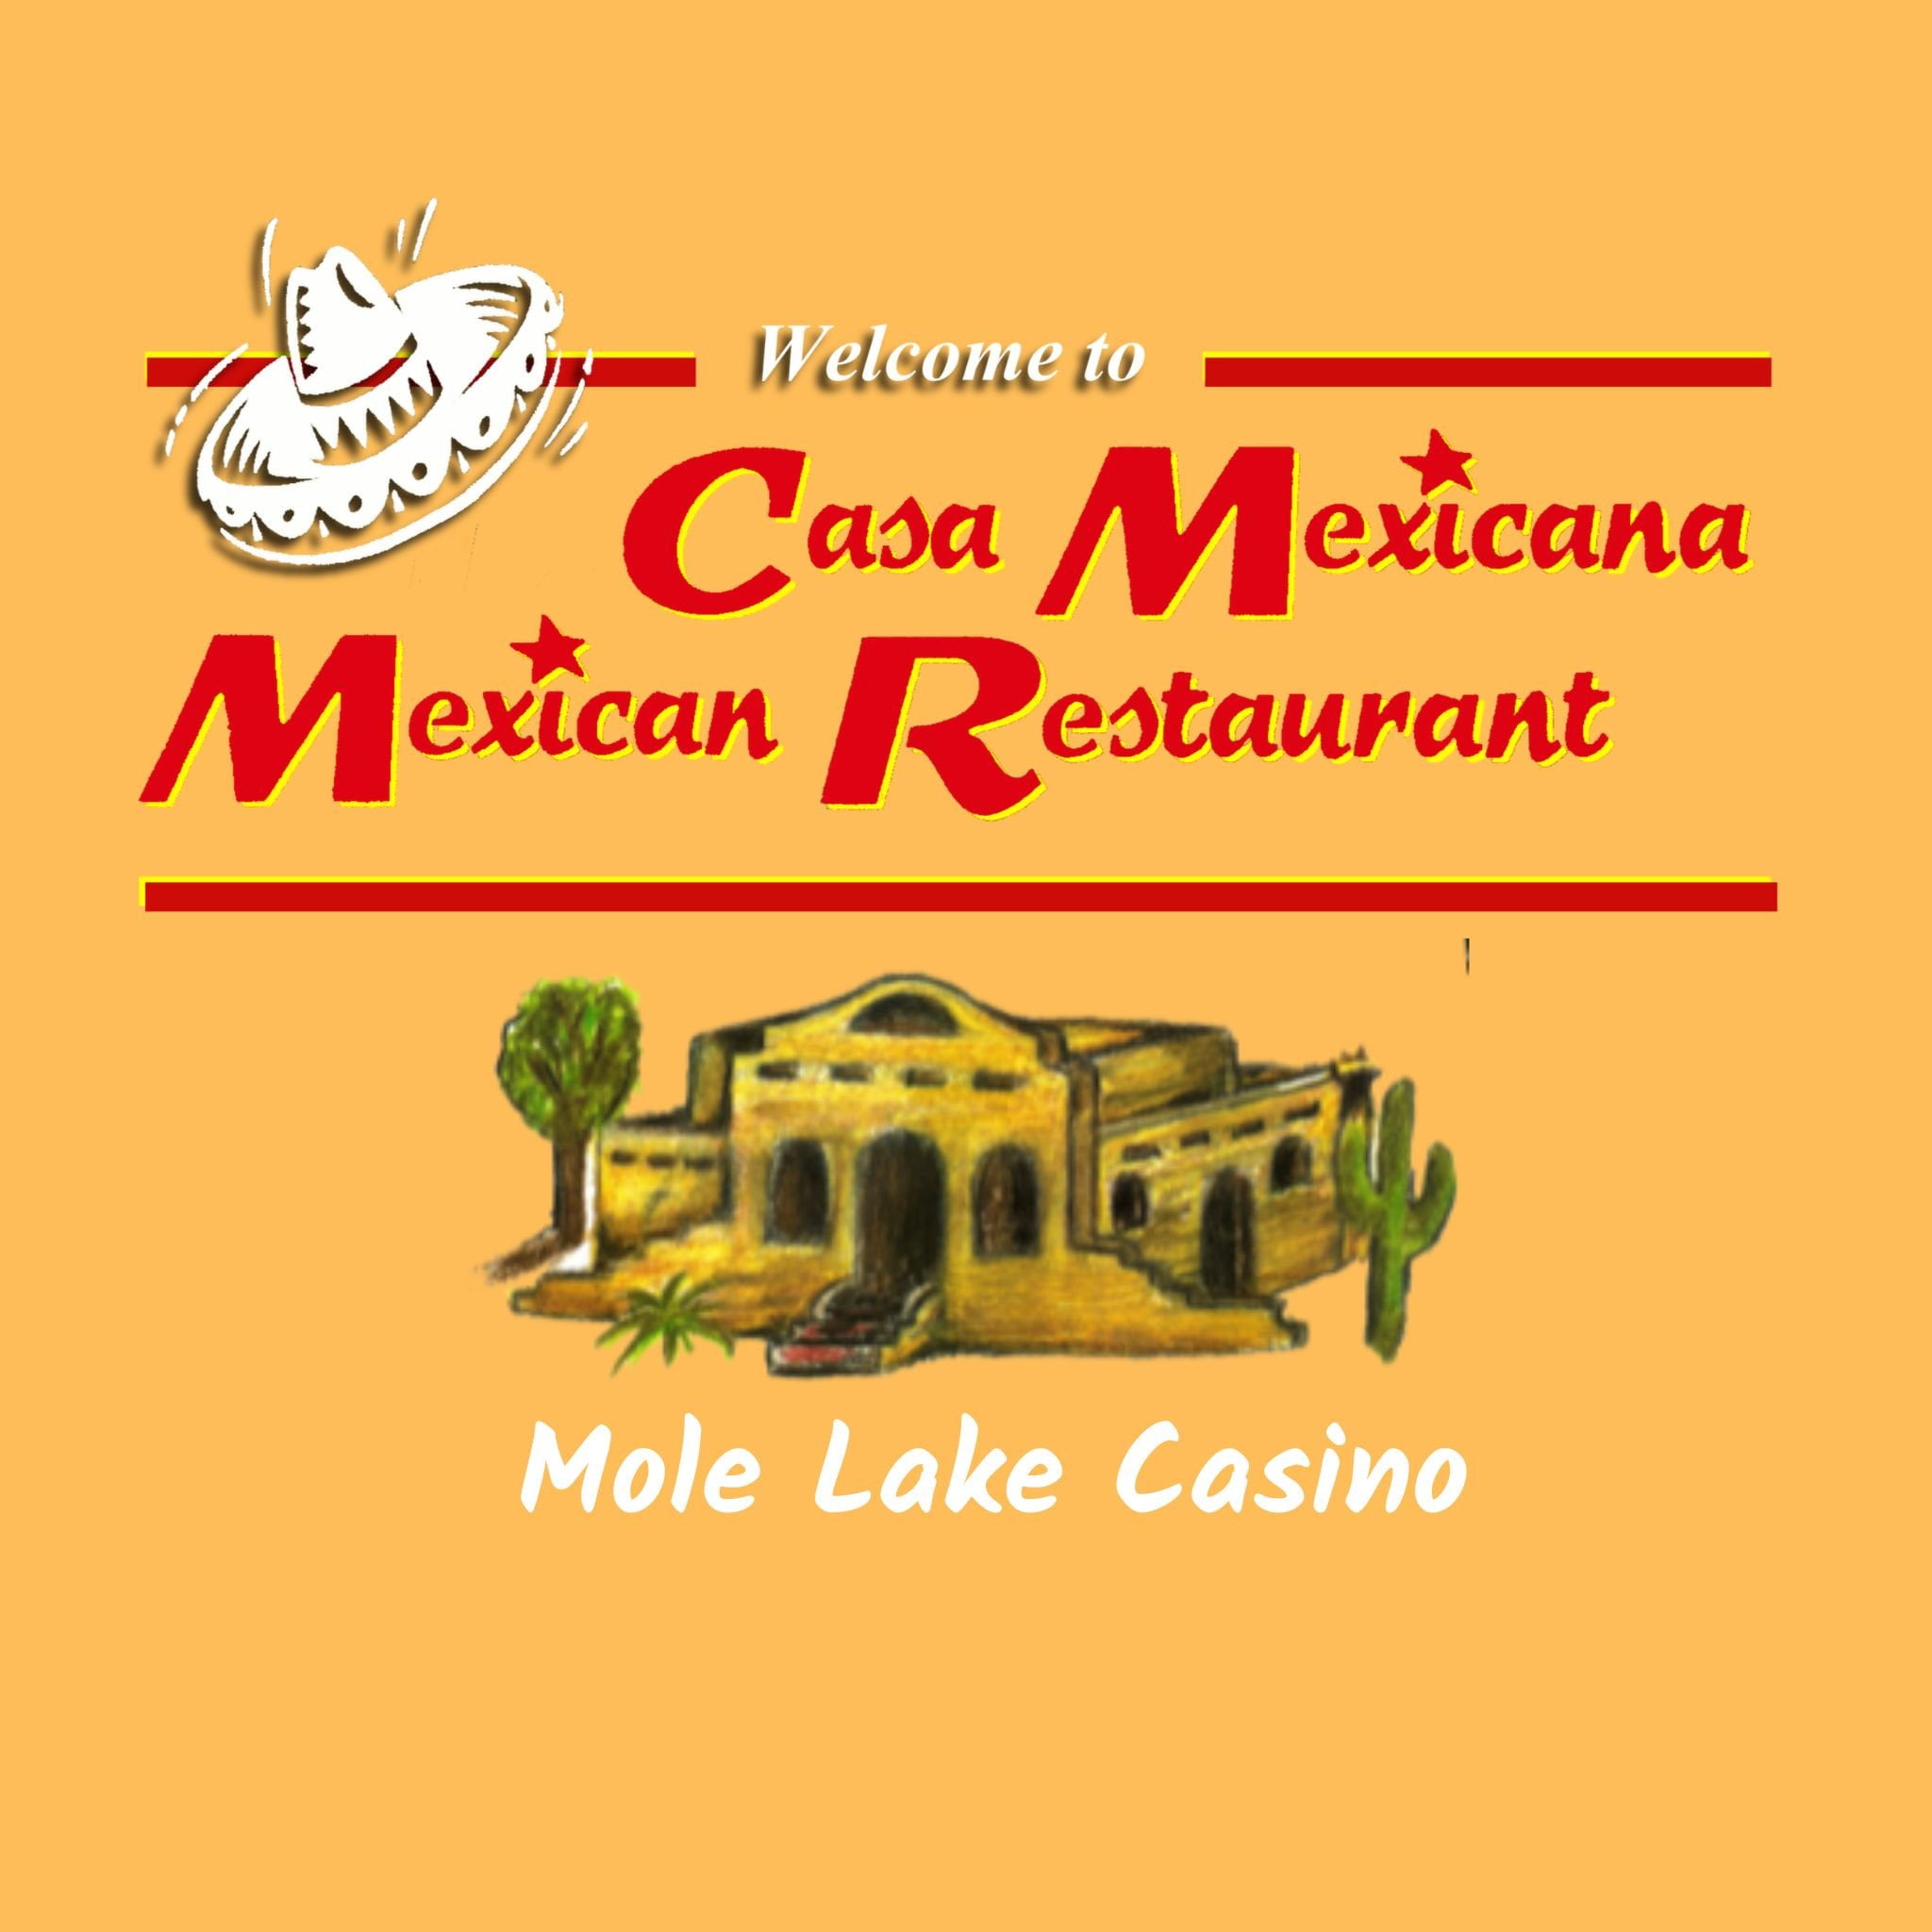 Casa Mexicana Is Now Open At Mole Lake Casino Serving Authentic Mexican Cuisine